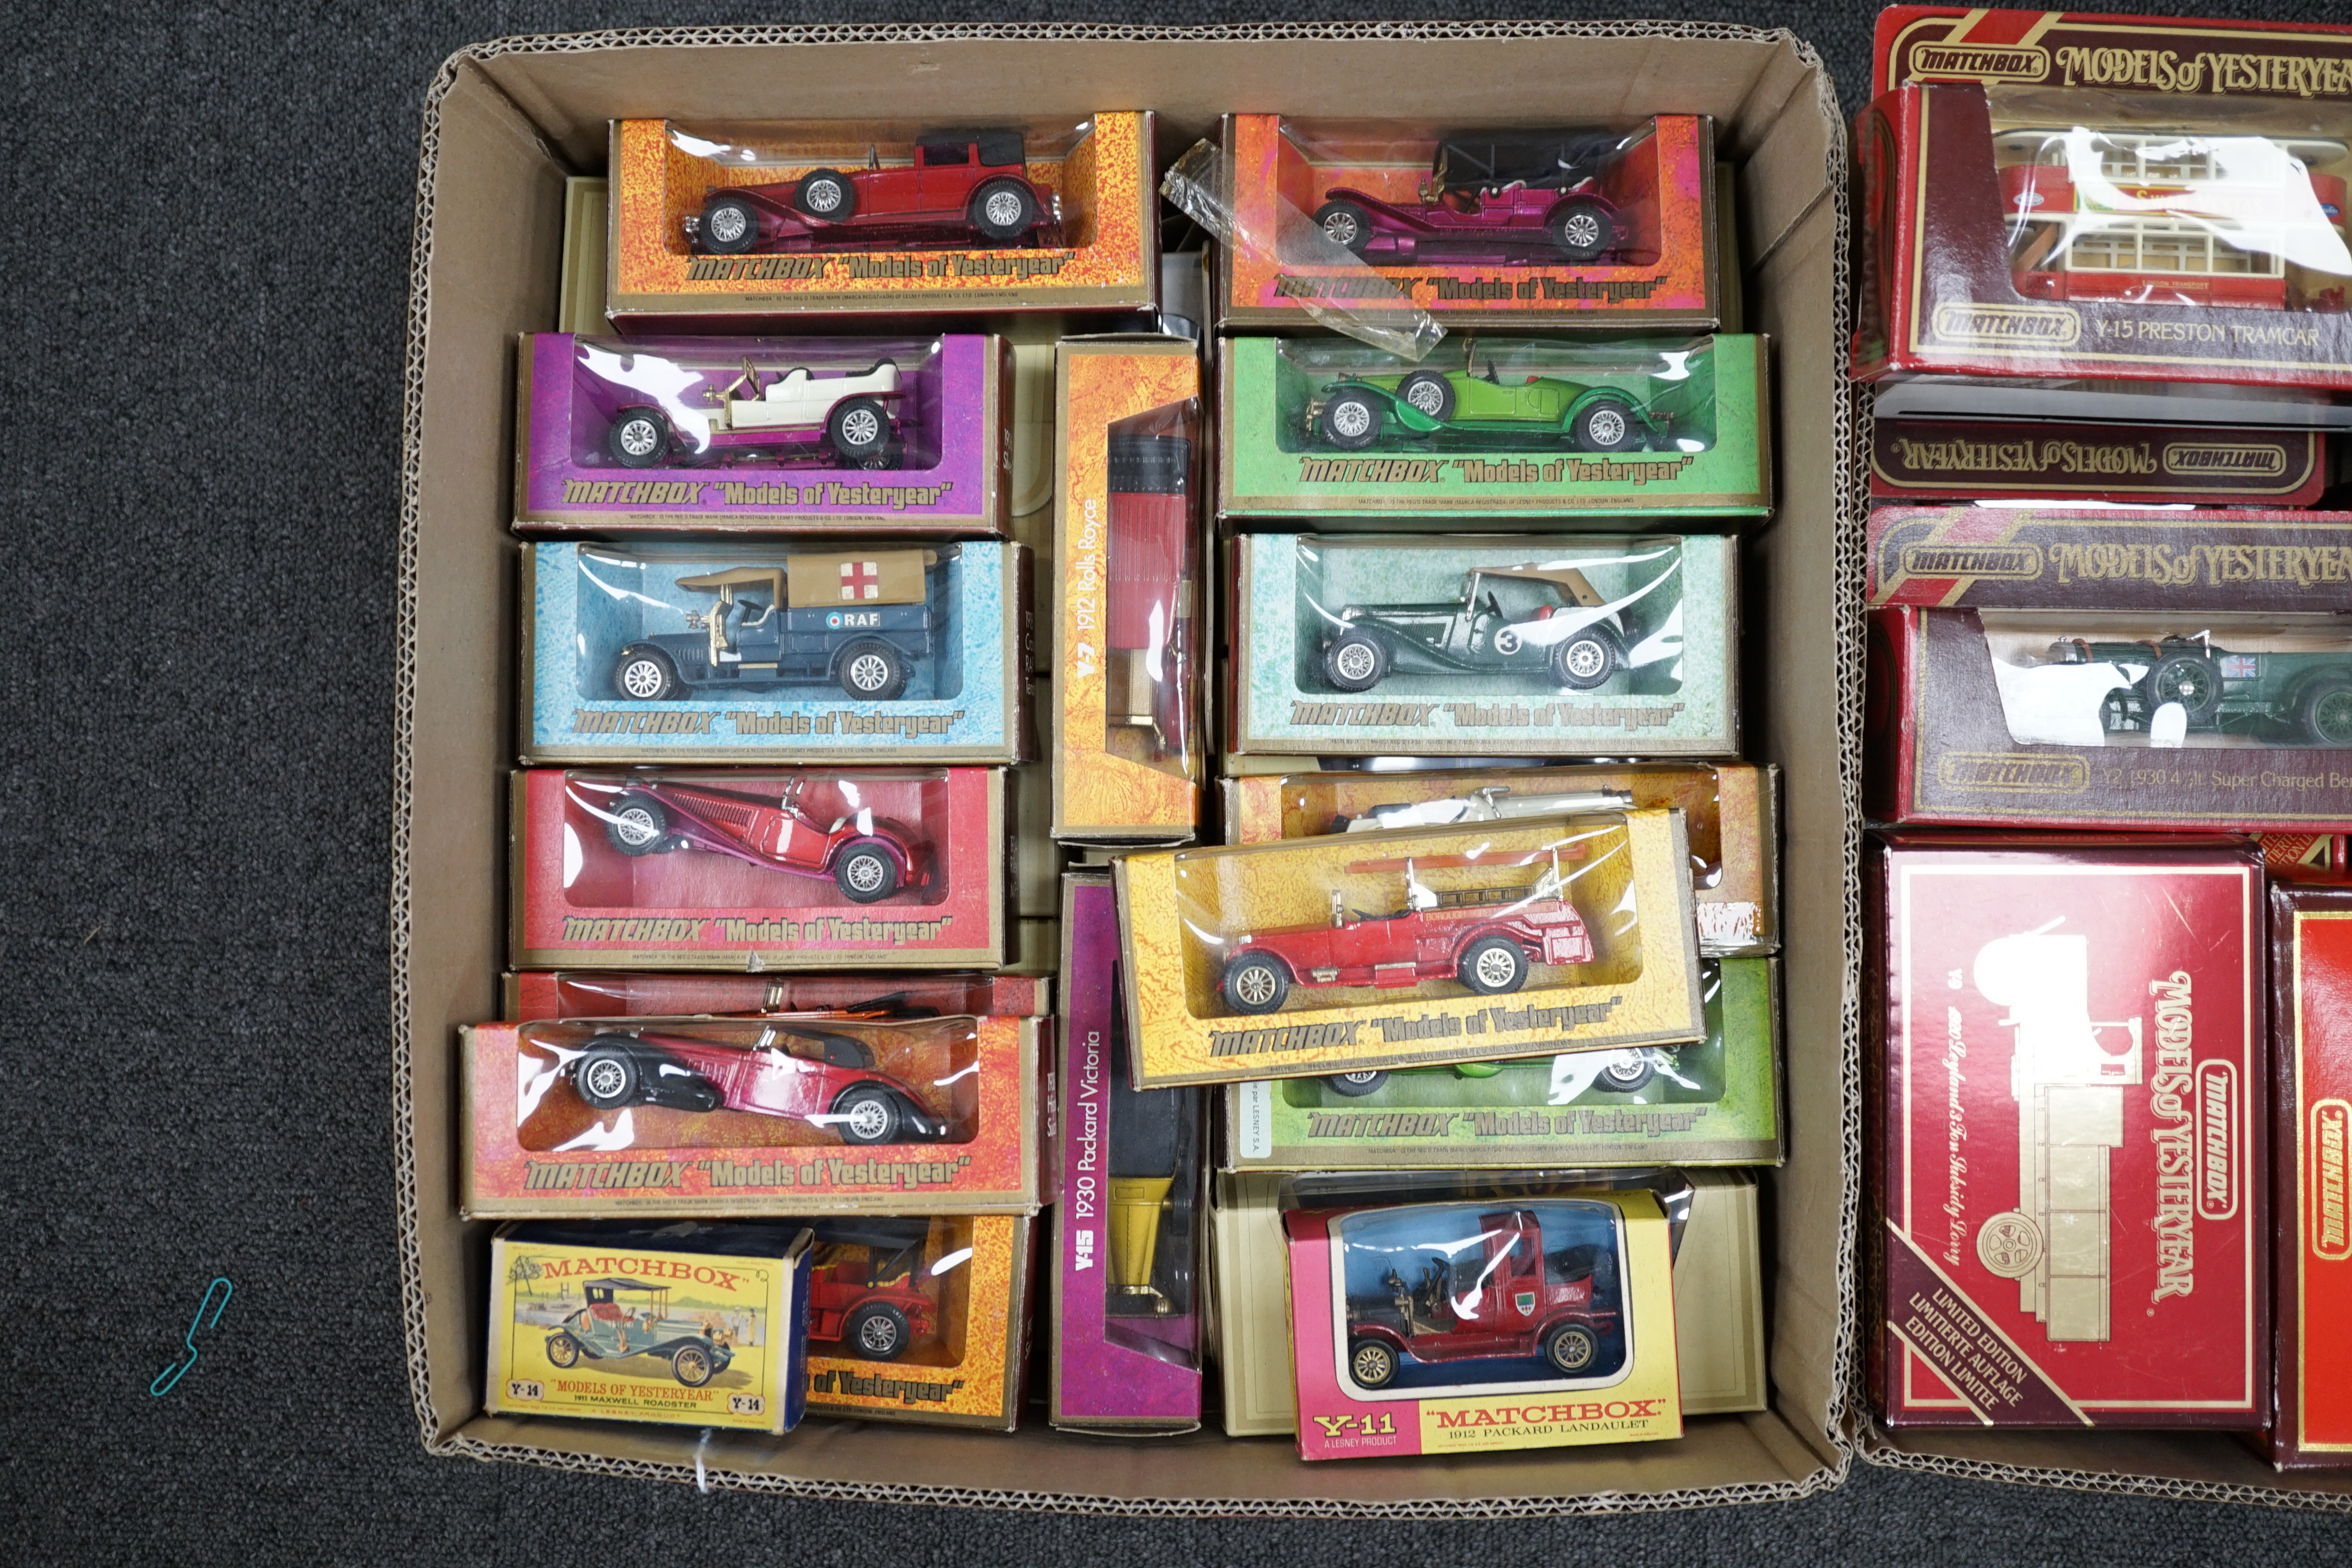 Seventy-nine Matchbox Models of Yesteryear in mainly woodgrain, cream and maroon era boxes, - Image 2 of 8